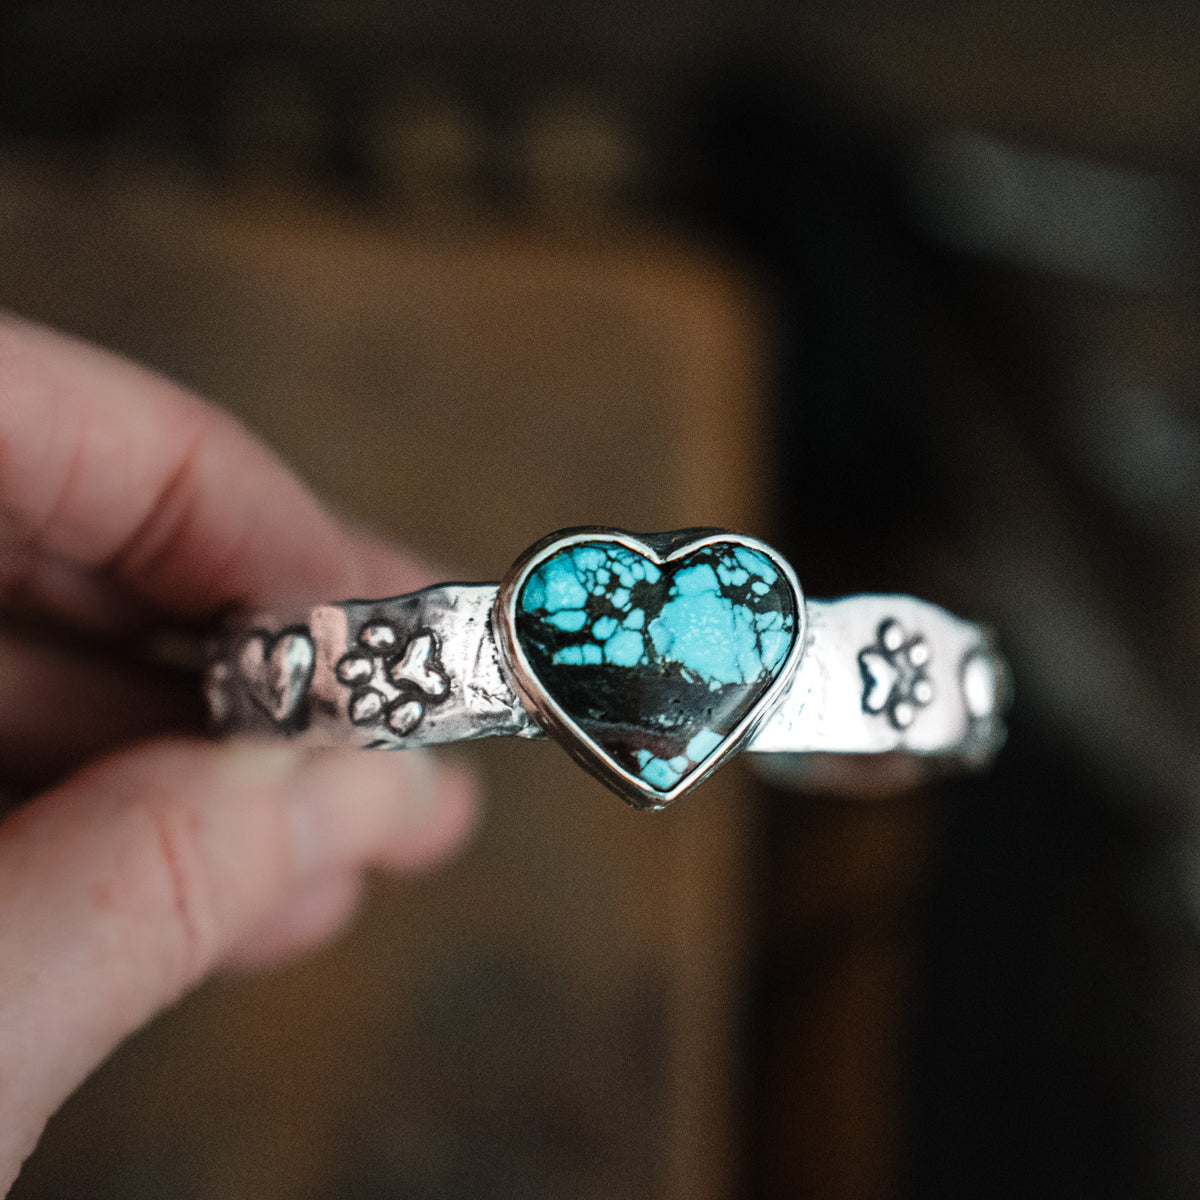 My Dog is Forever in my Heart Turquoise Cuff